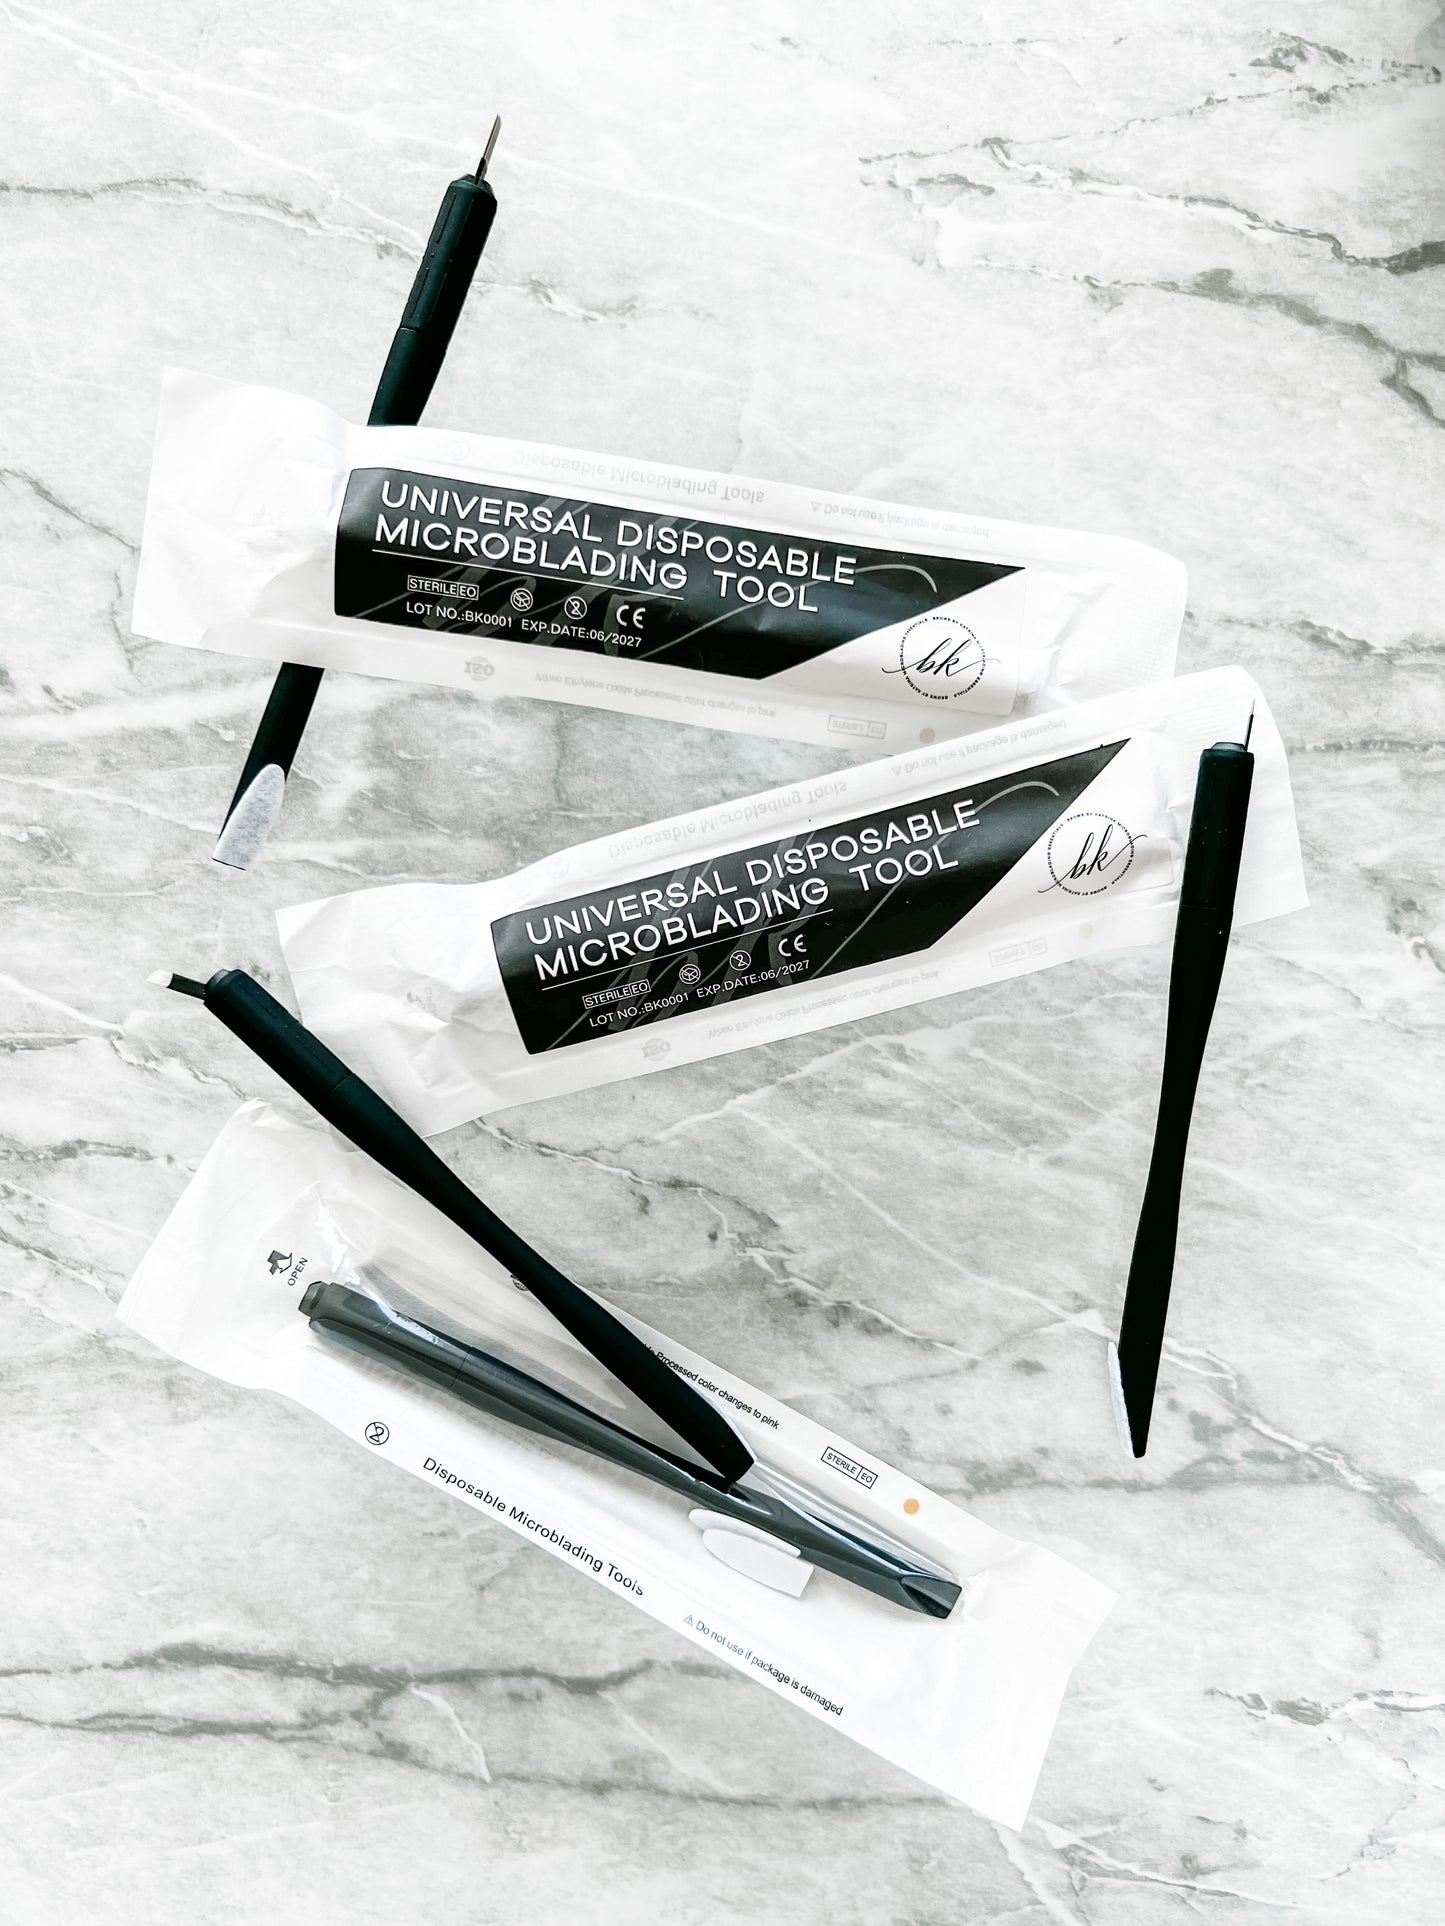 Sterilized Disposable Microblading Tool (Eco-Friendly)